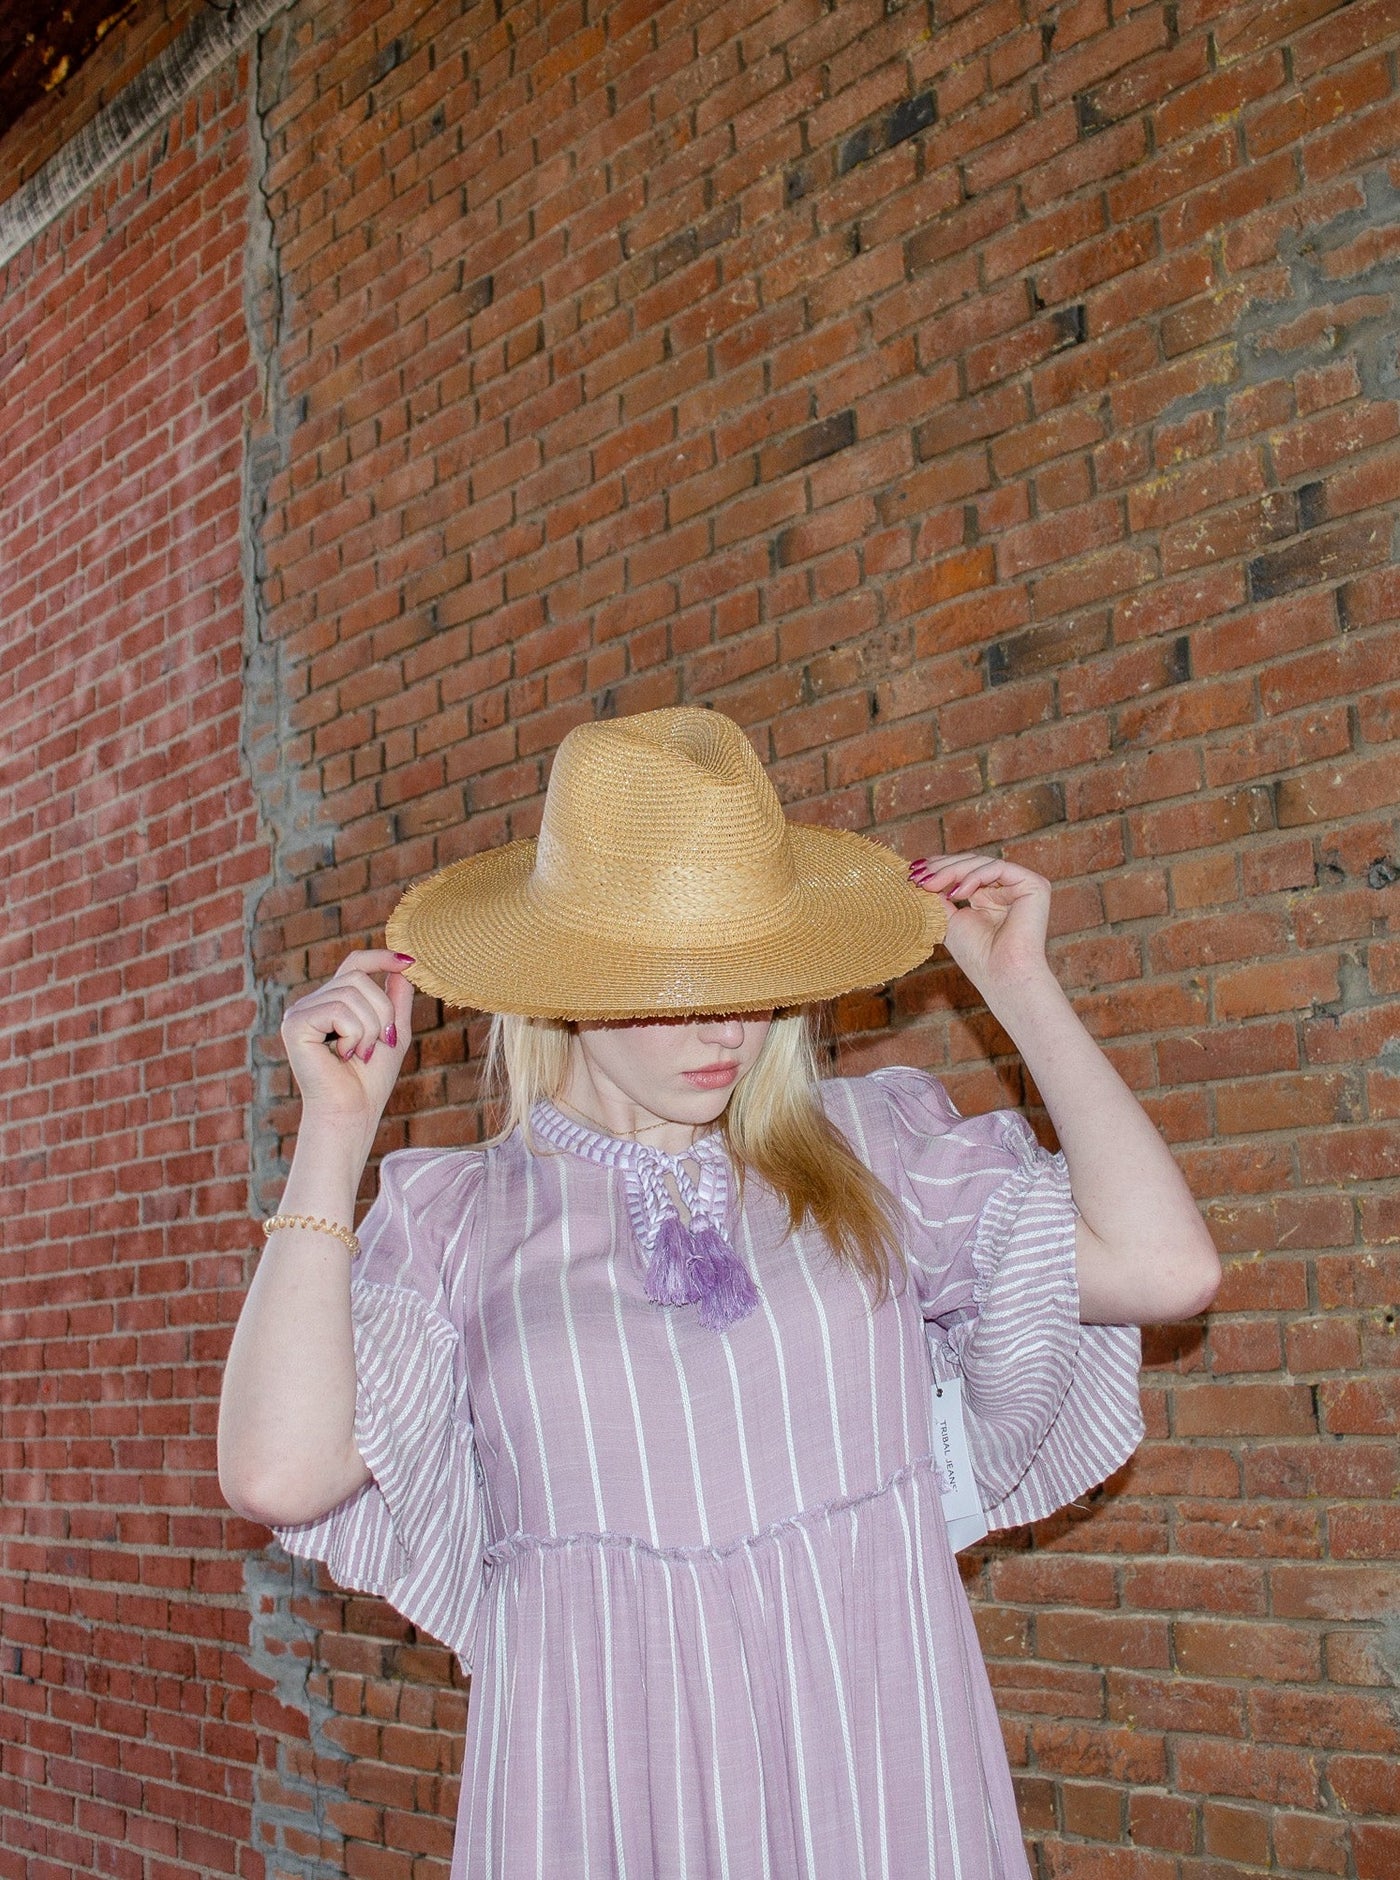 Model is wearing a wide brimmed straw sunhat. Hat is the color light brown.